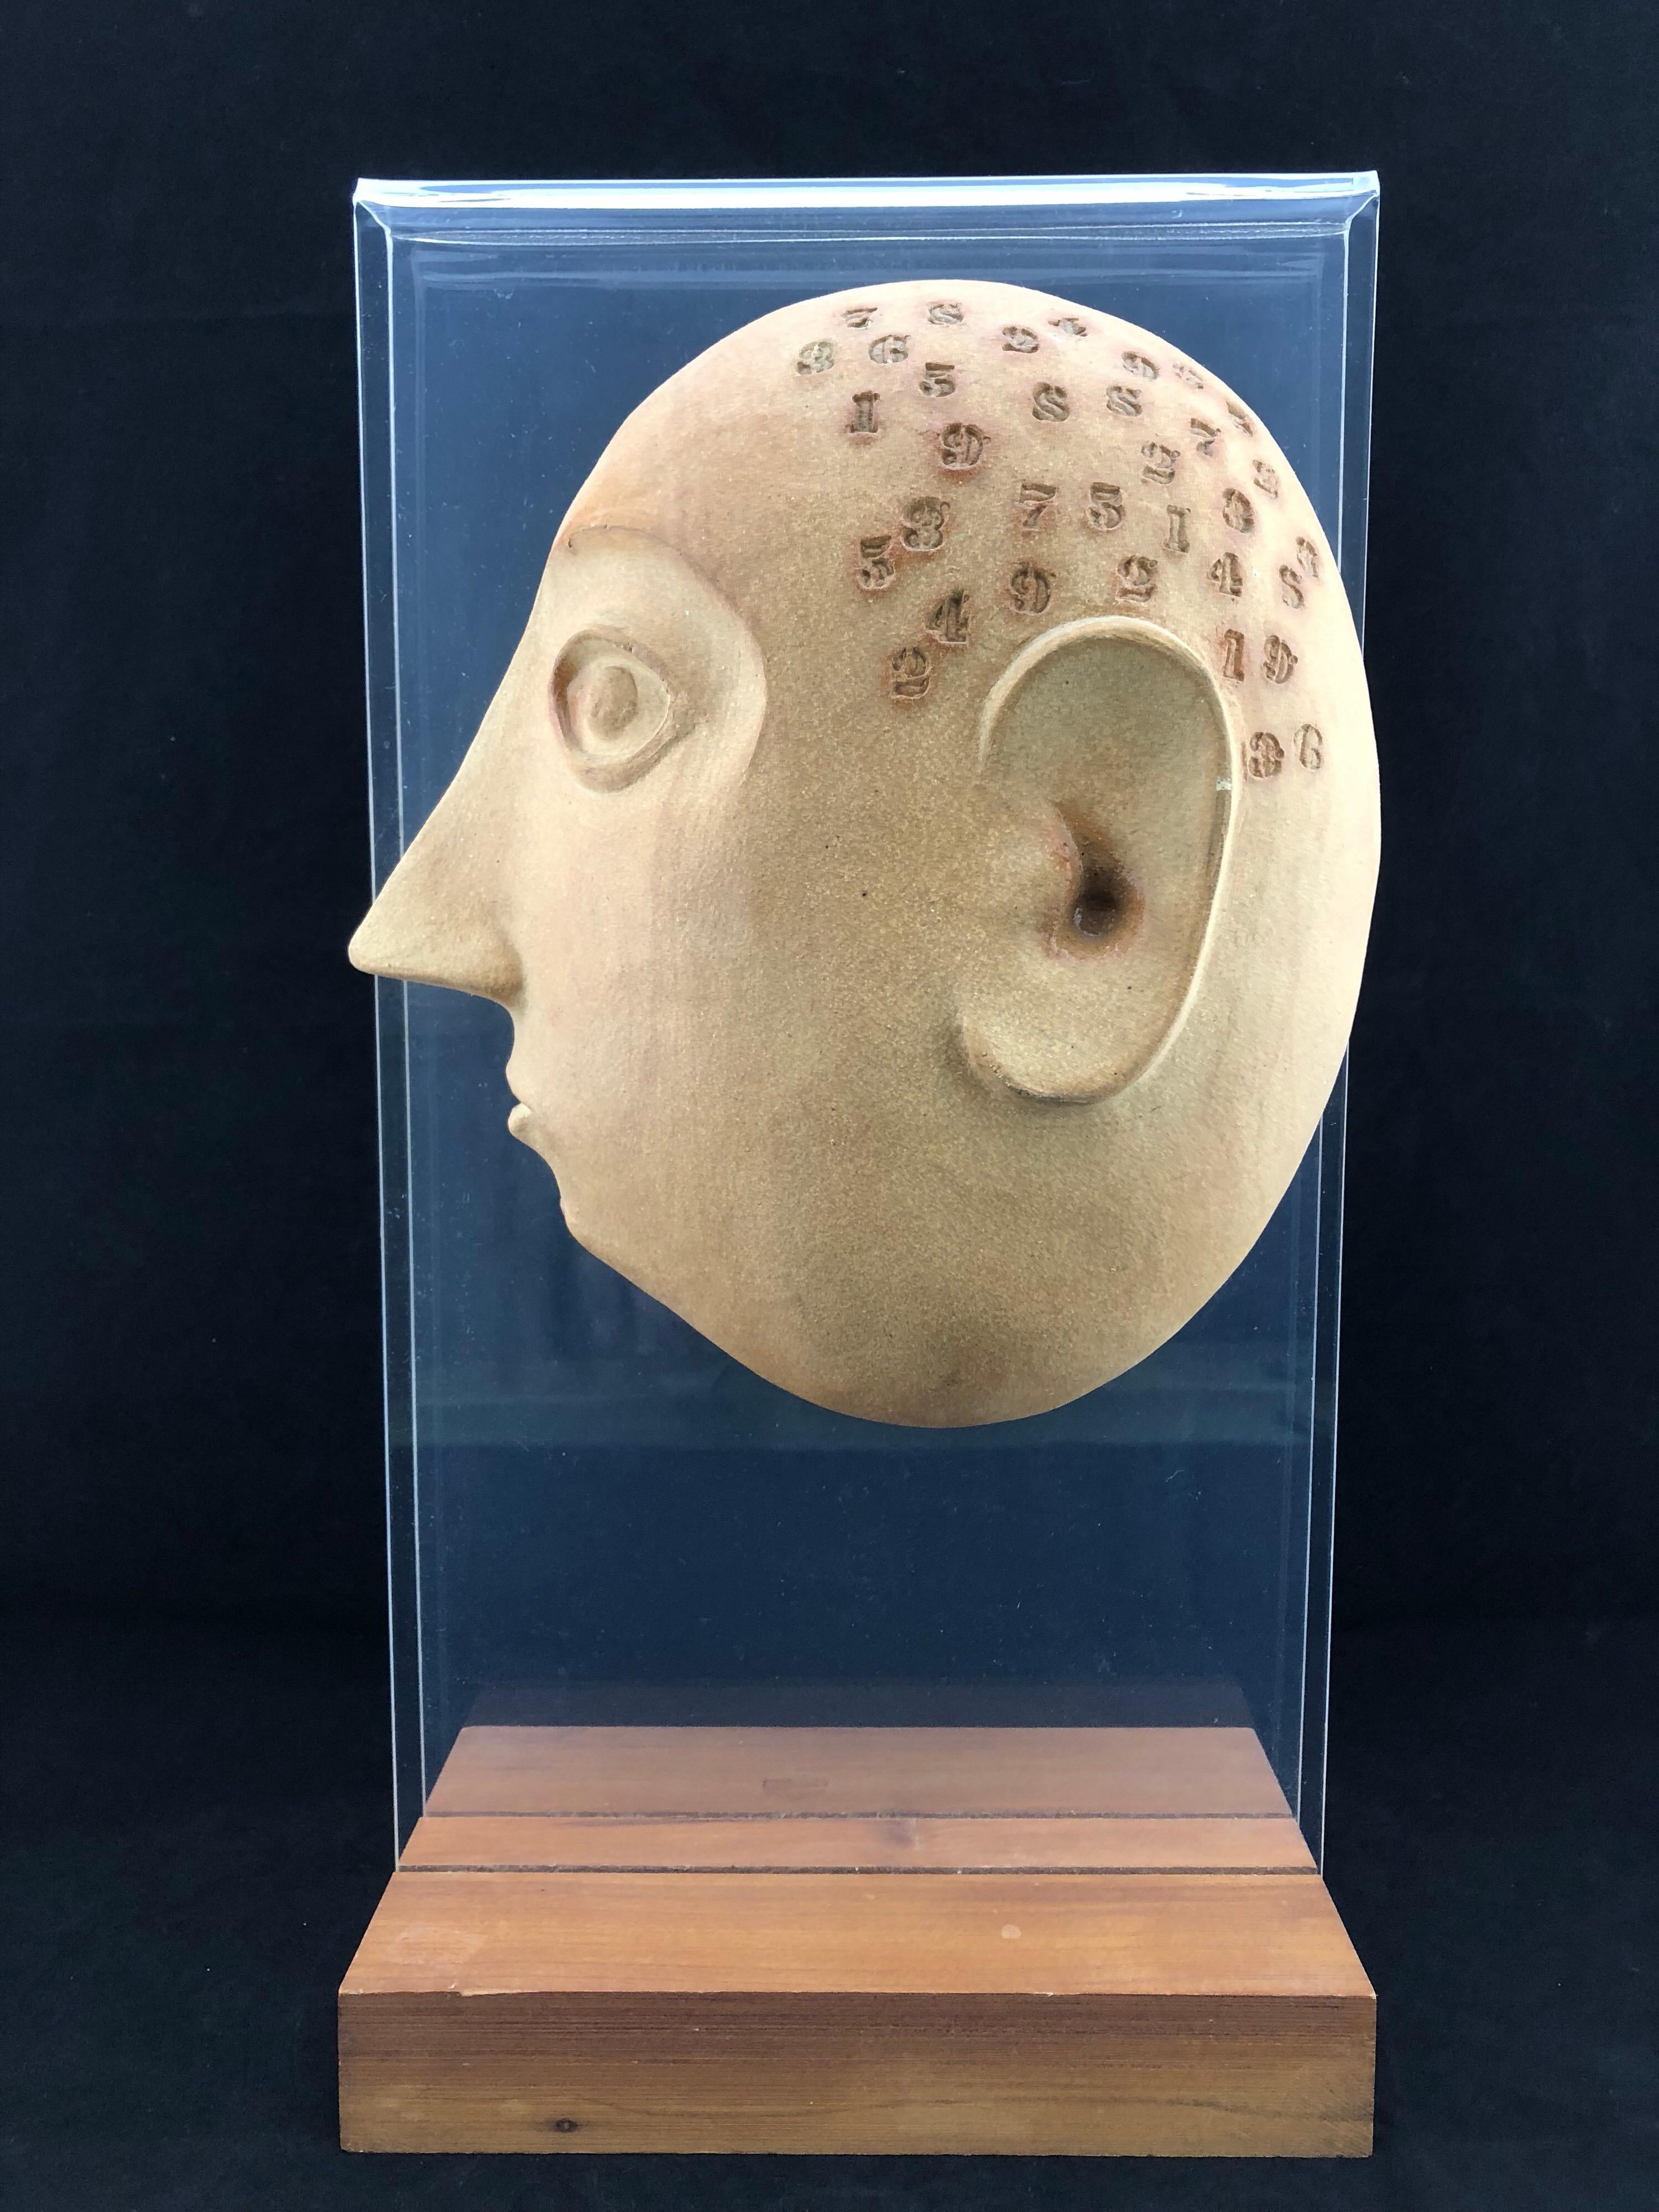 Midcentury Acrylic and Ceramic Head Sculpture by David Gil for Bennington In Good Condition For Sale In Marietta, GA